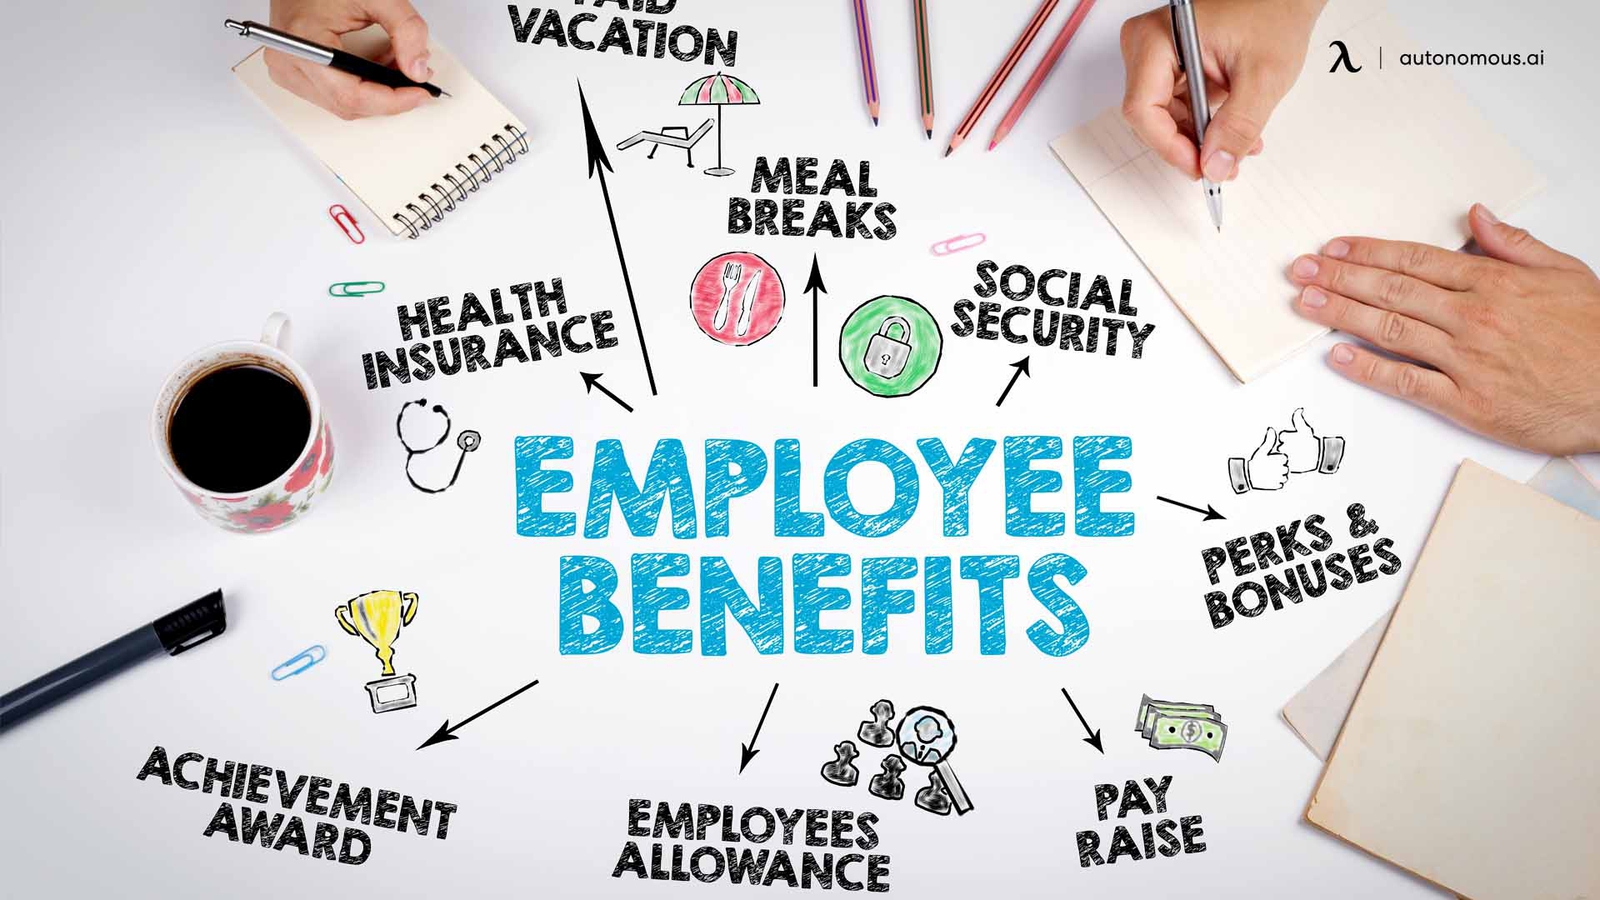 Why Should Managers Pay Attention To Employee Benefits?